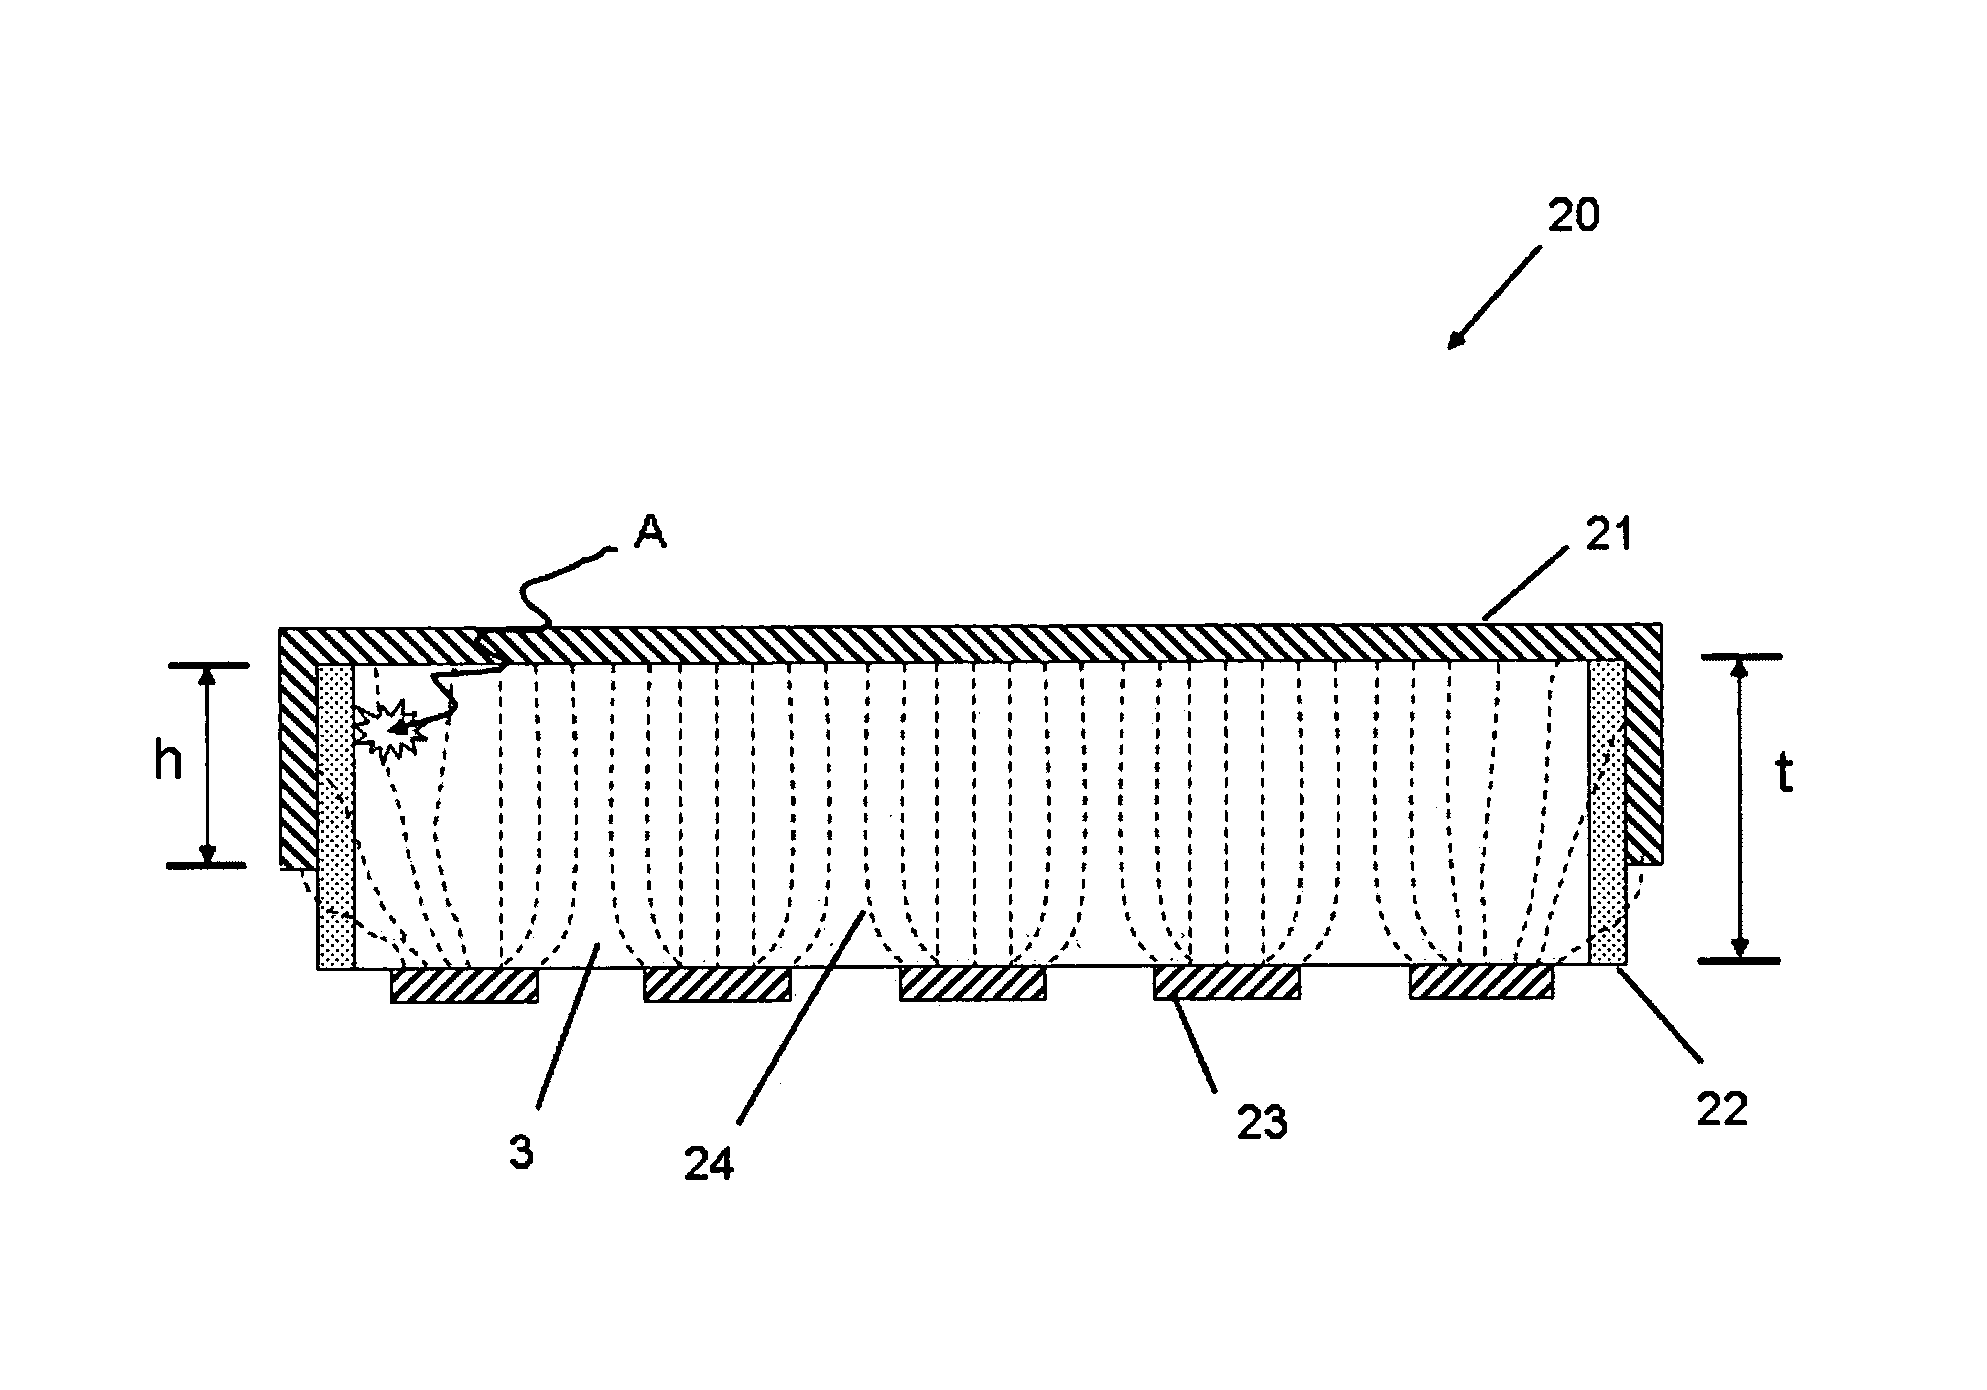 Segmented radiation detector with side shielding cathode